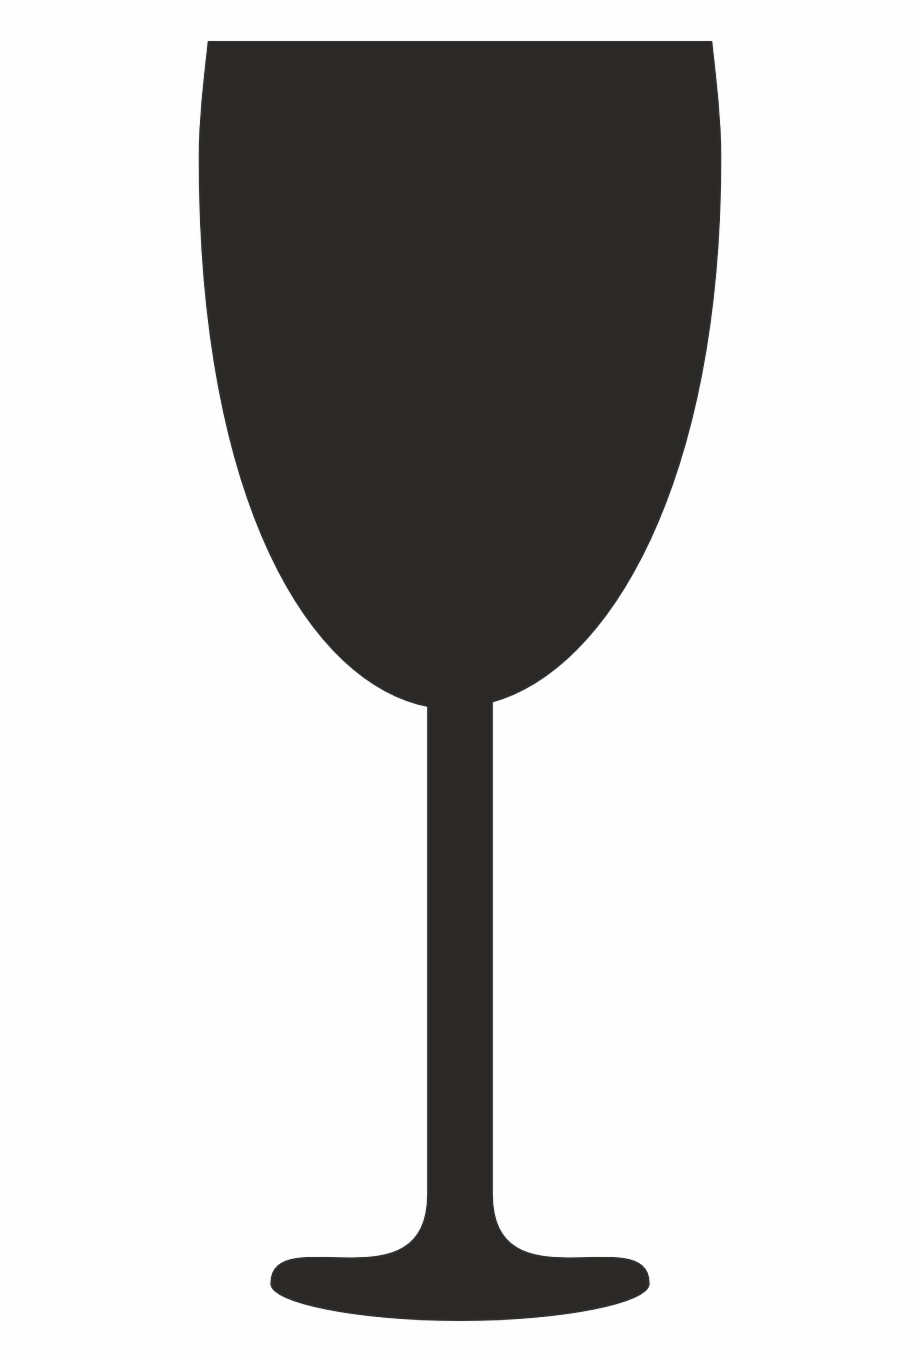 Cup Alcohol Drink Glass Glasses Png Image